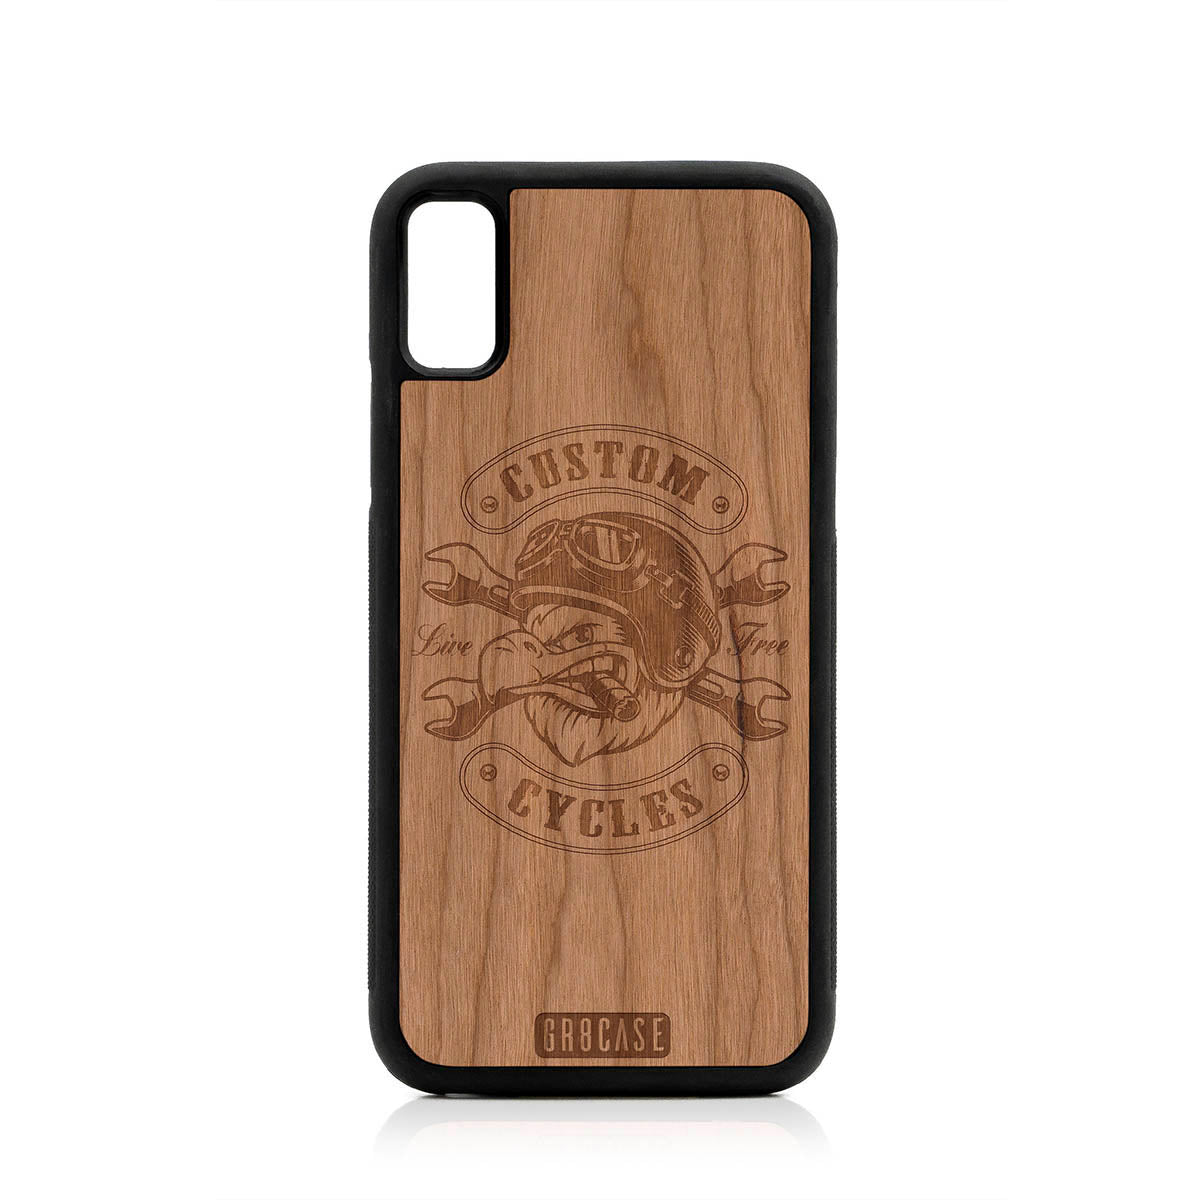 Custom Cycles Live Free (Biker Eagle) Design Wood Case For iPhone X/XS by GR8CASE